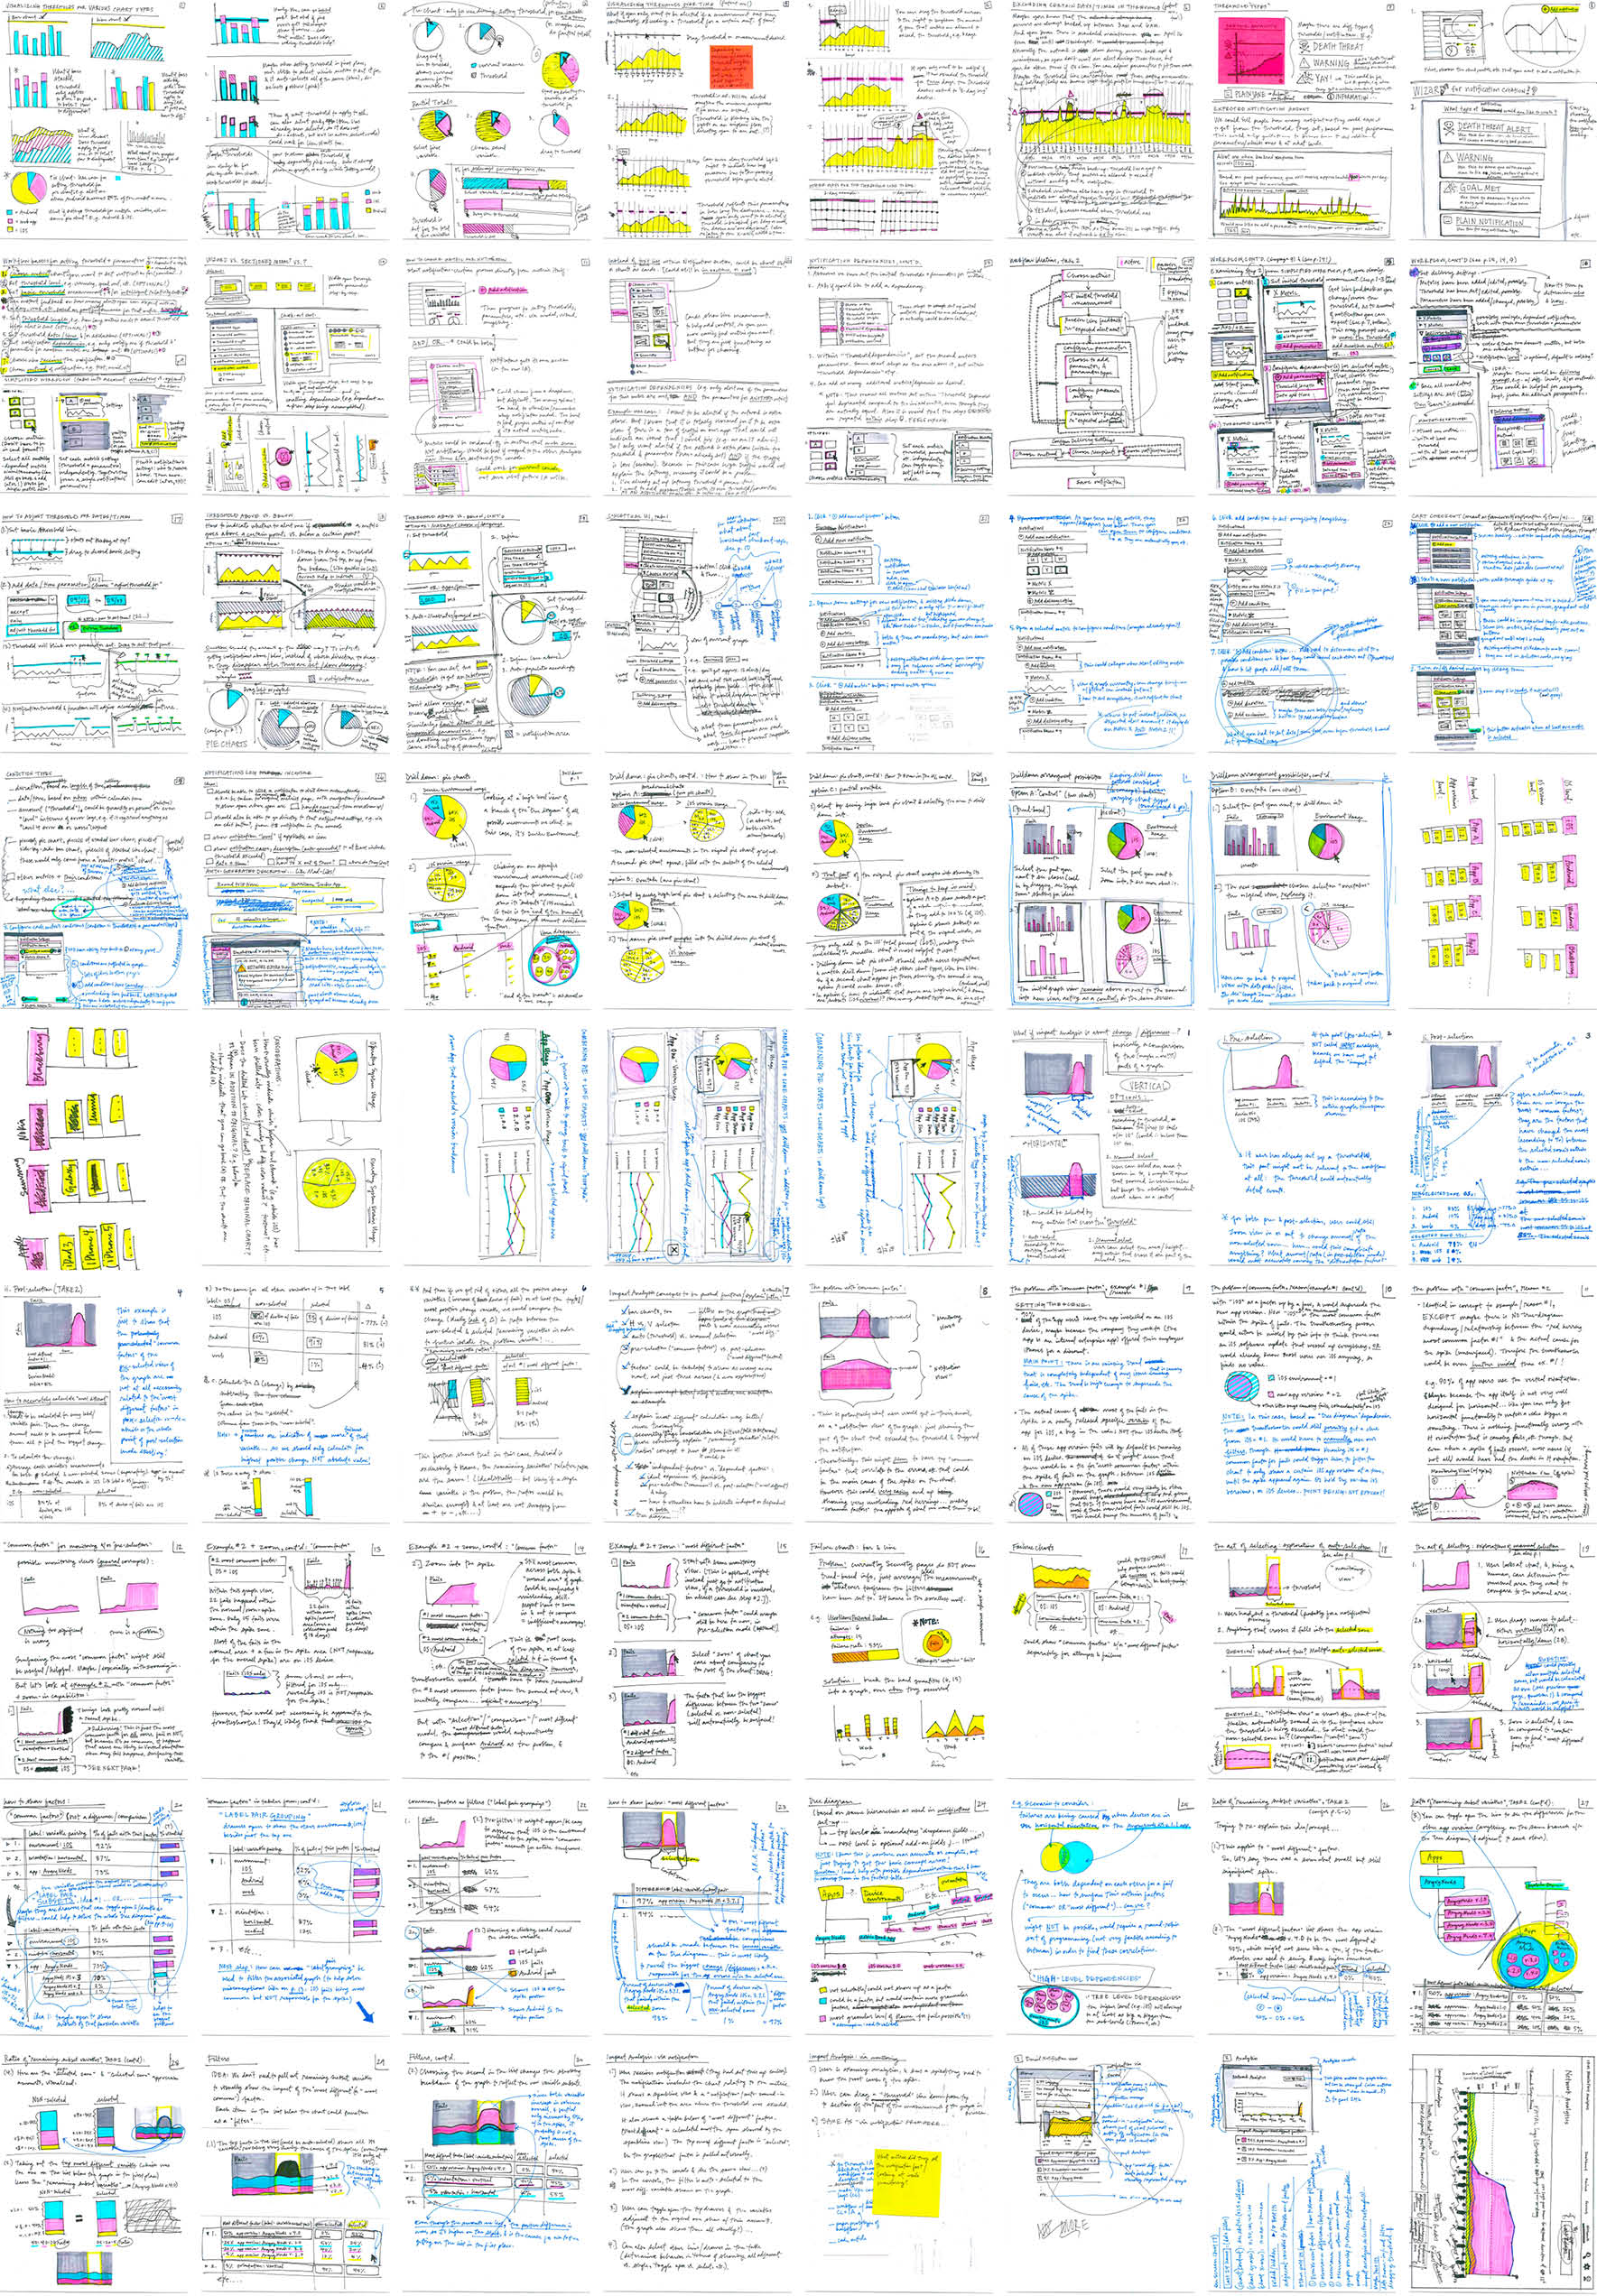 Seventy-two full-pages of sketches, laid out in a grid.